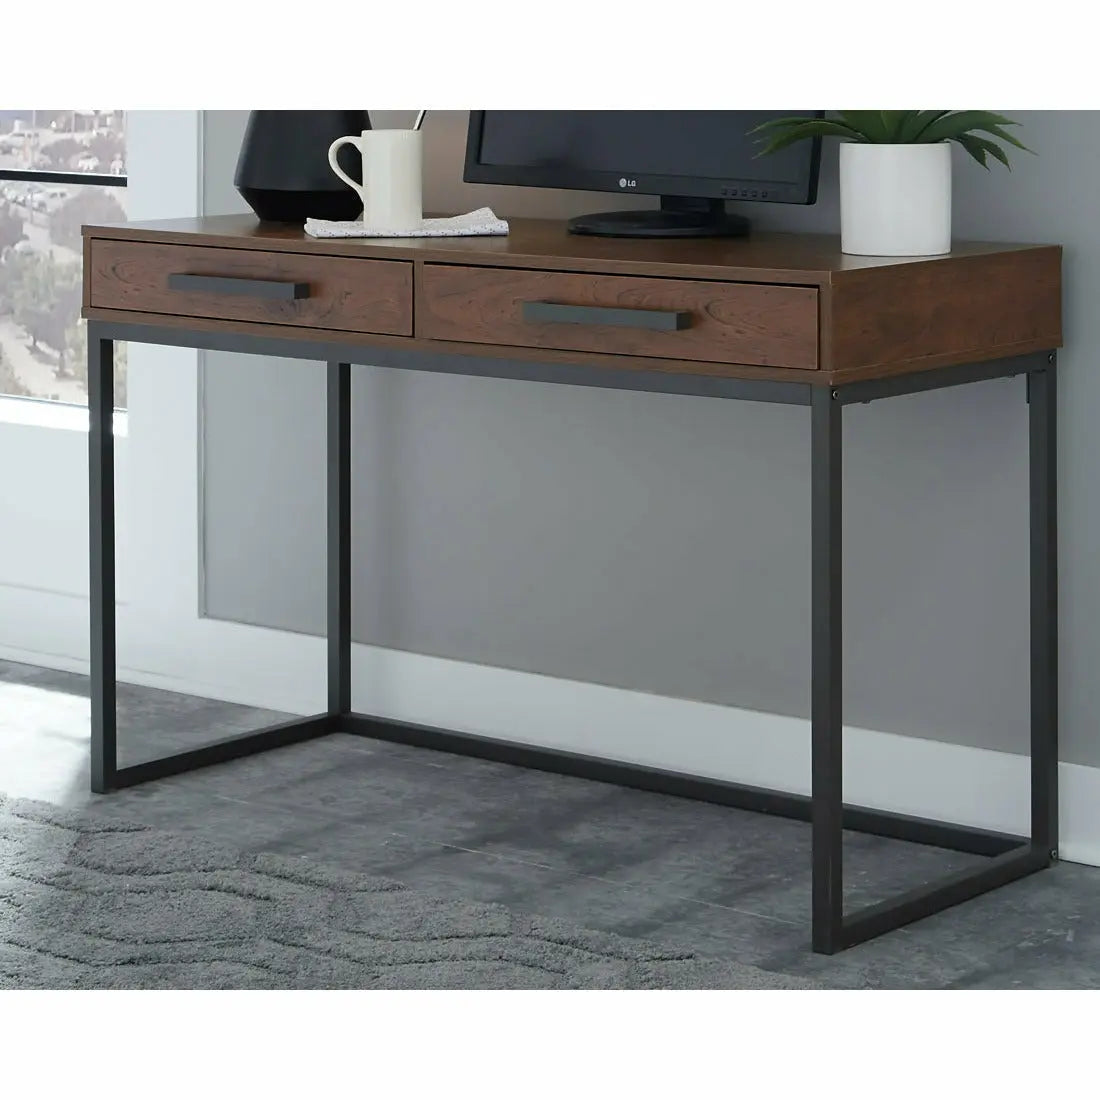 Horatio Home Office Small Desk OFFICE